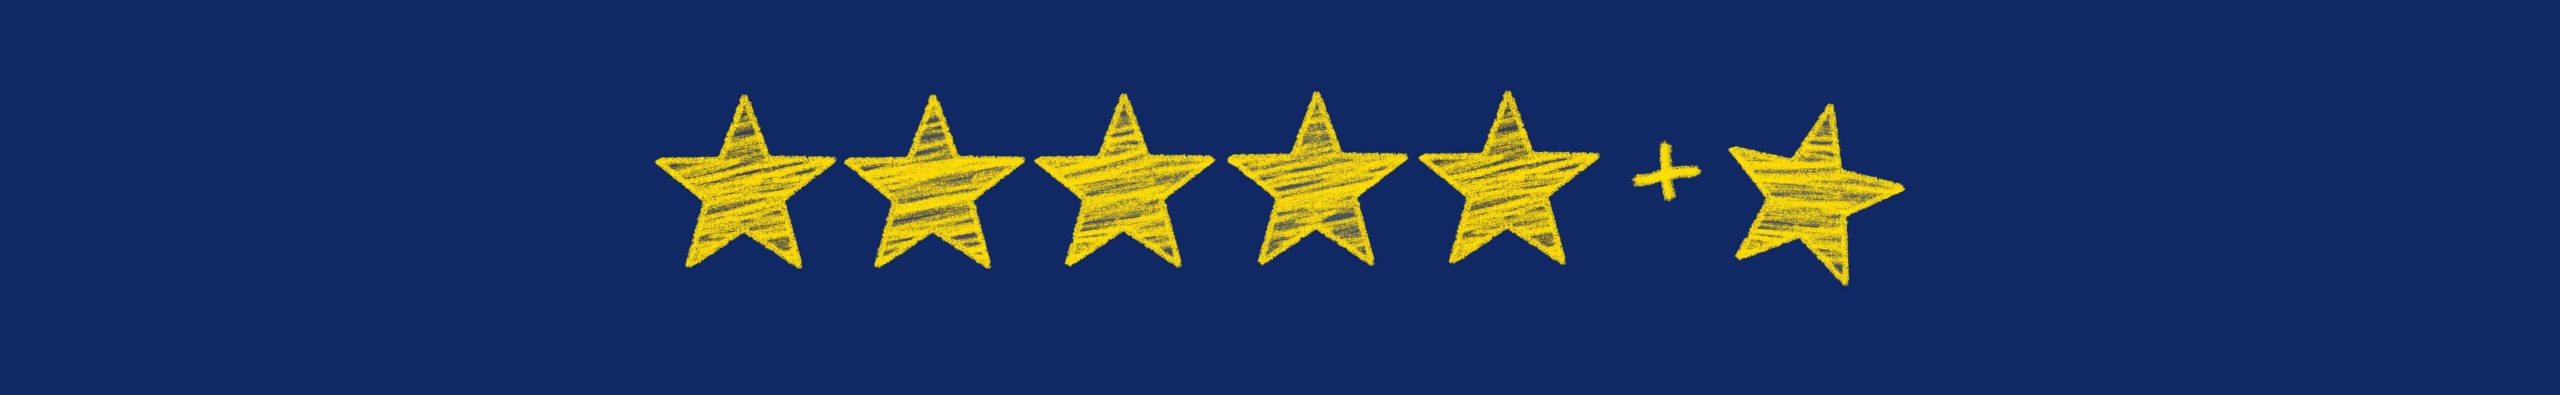 Banner with five stars, a plus sign, and one extra star